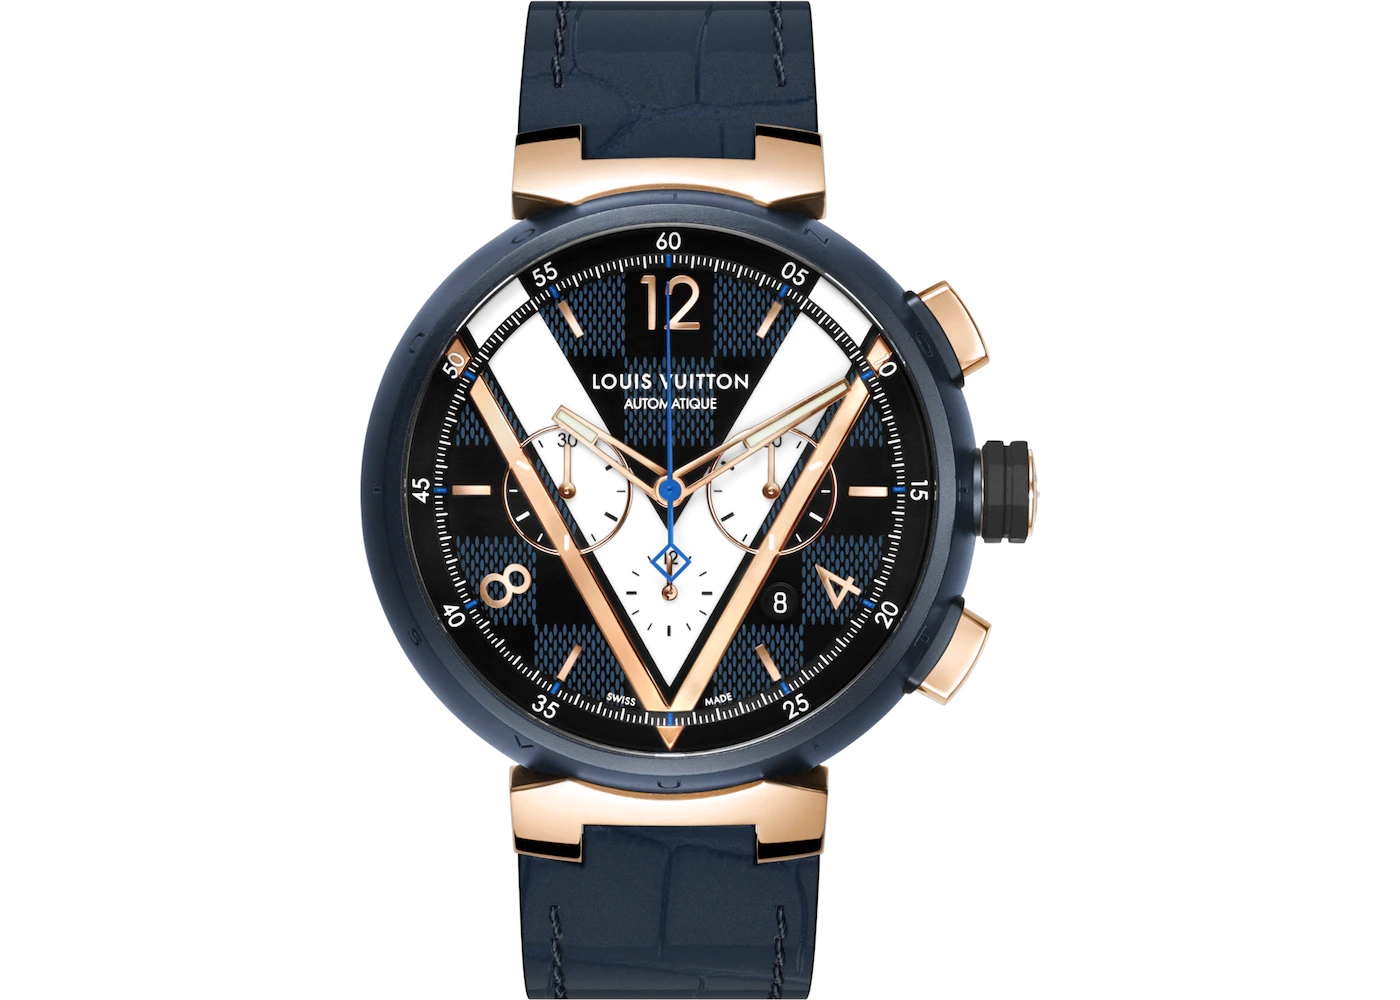 Louis Vuitton Tambour Automatic Chronograph Damier Cobalt V for $6,304  for sale from a Seller on Chrono24